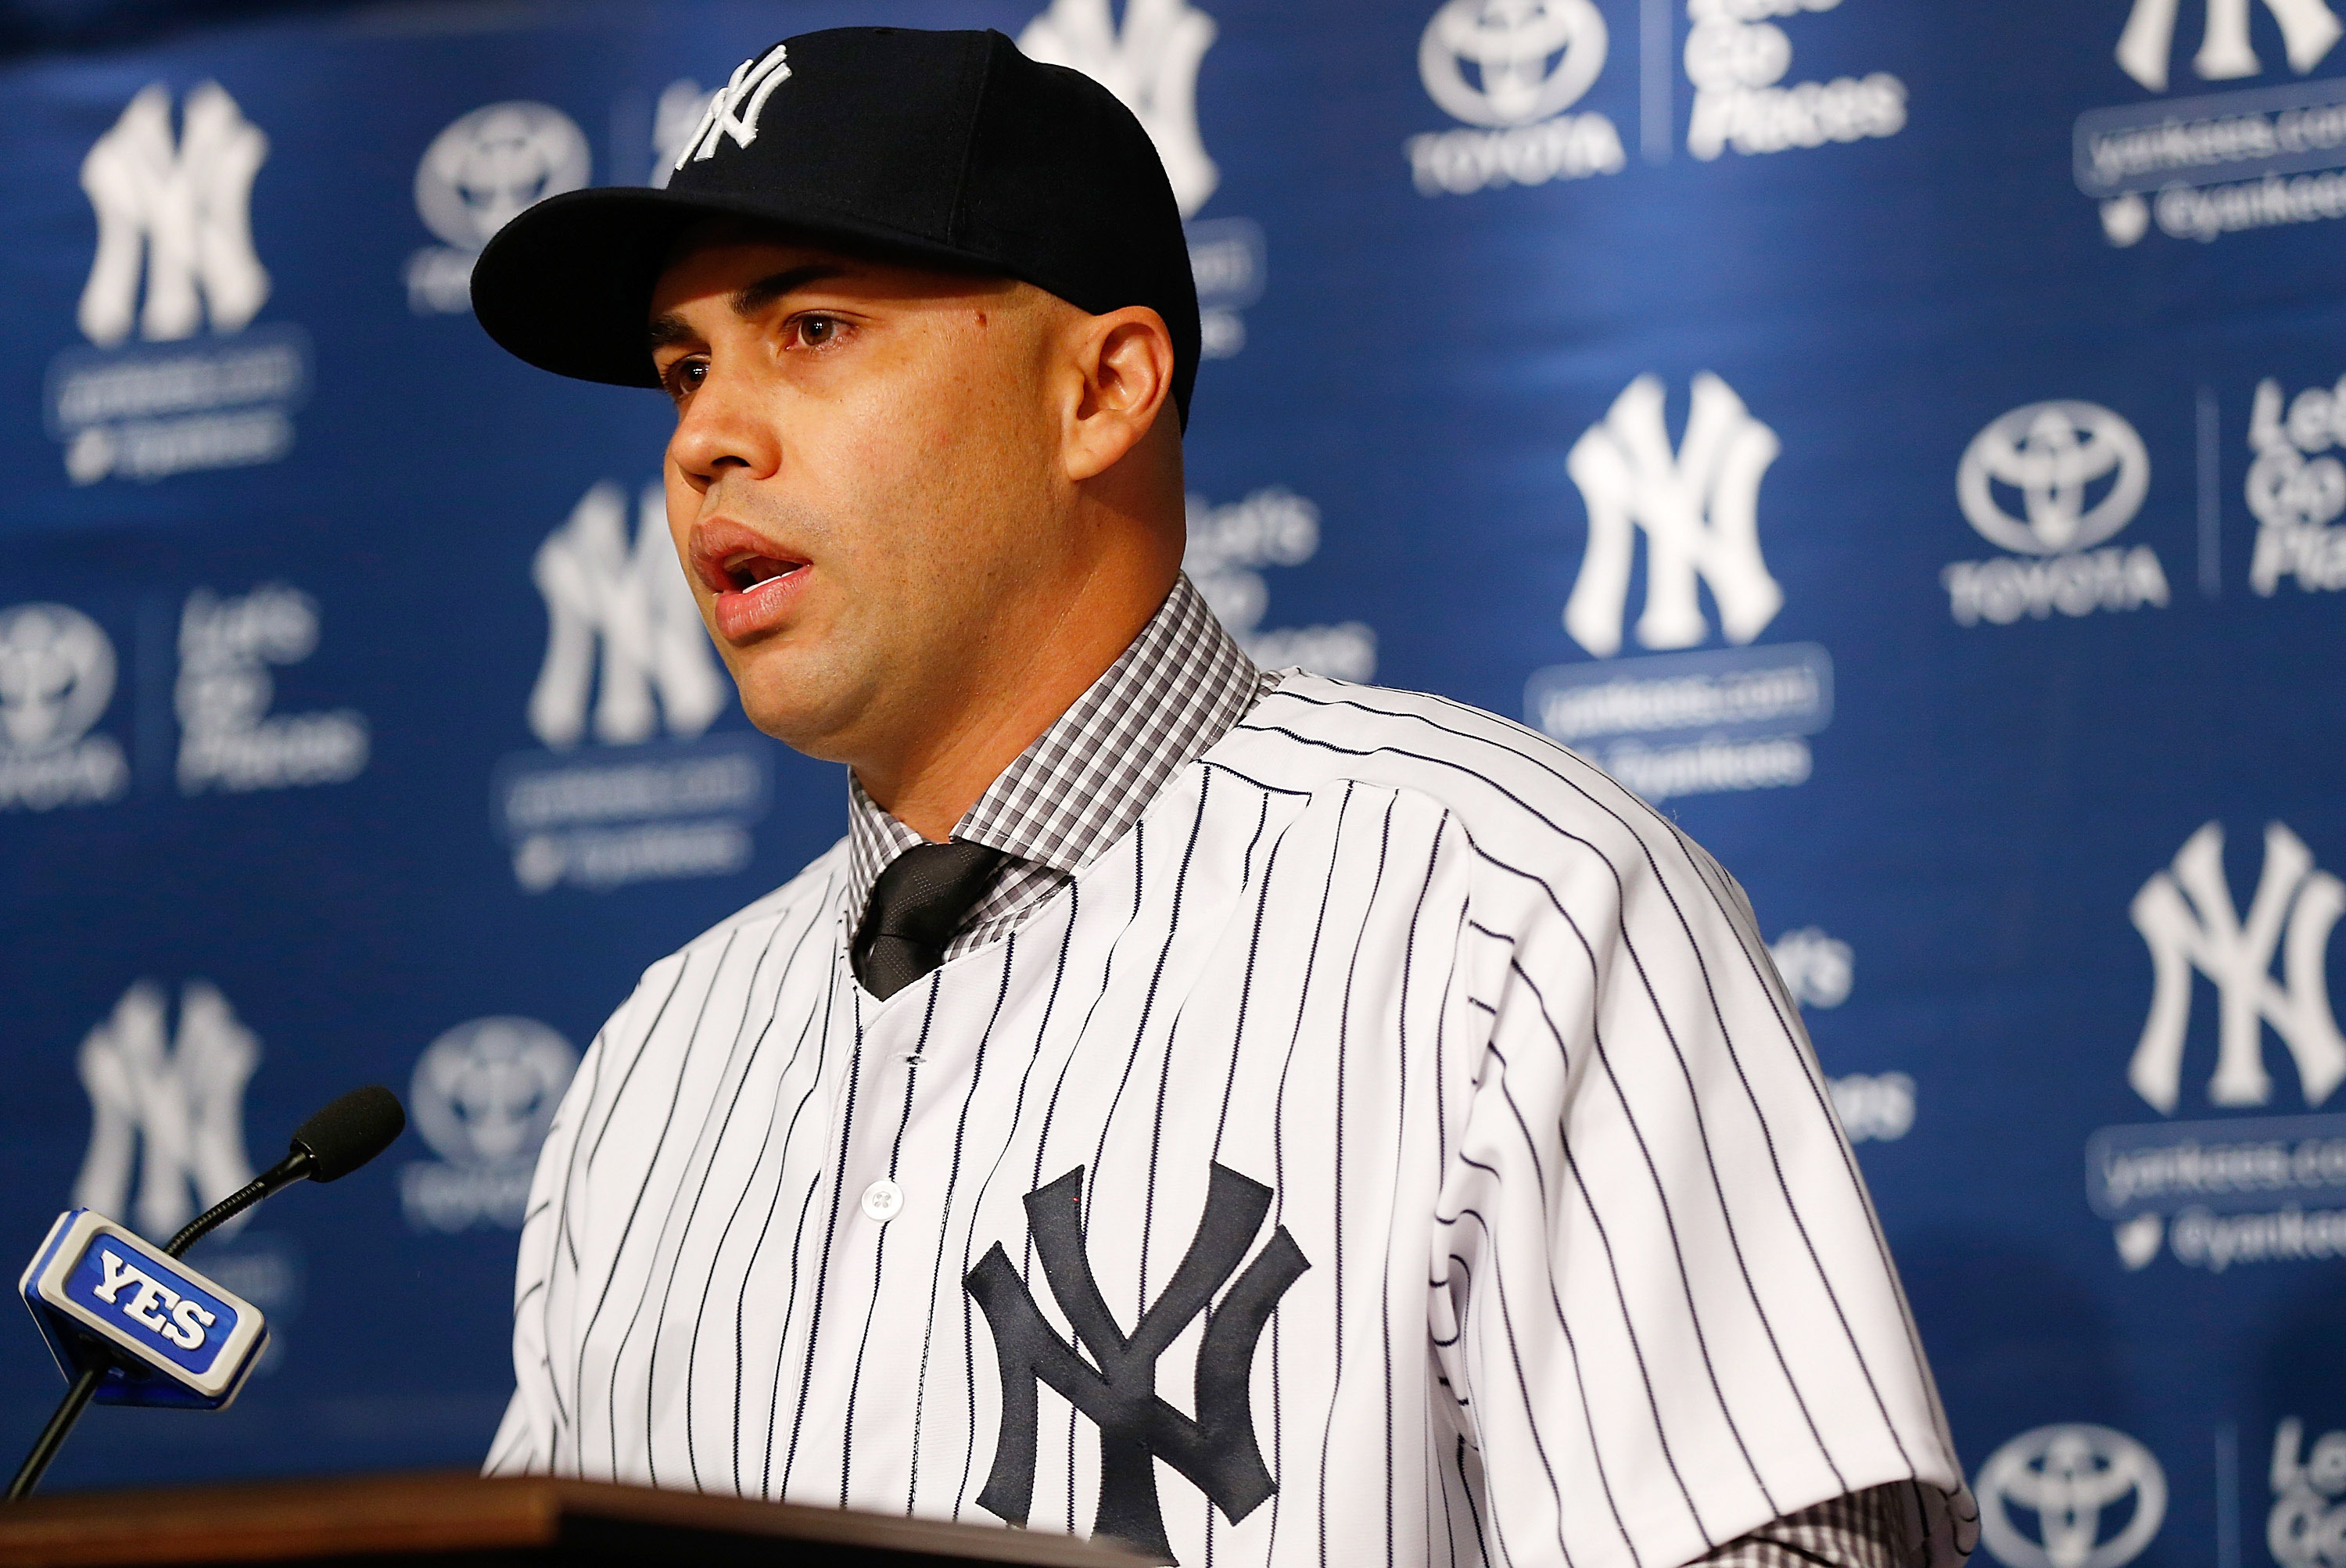 New York Yankees fans delighted to see Carlos Beltran leave the